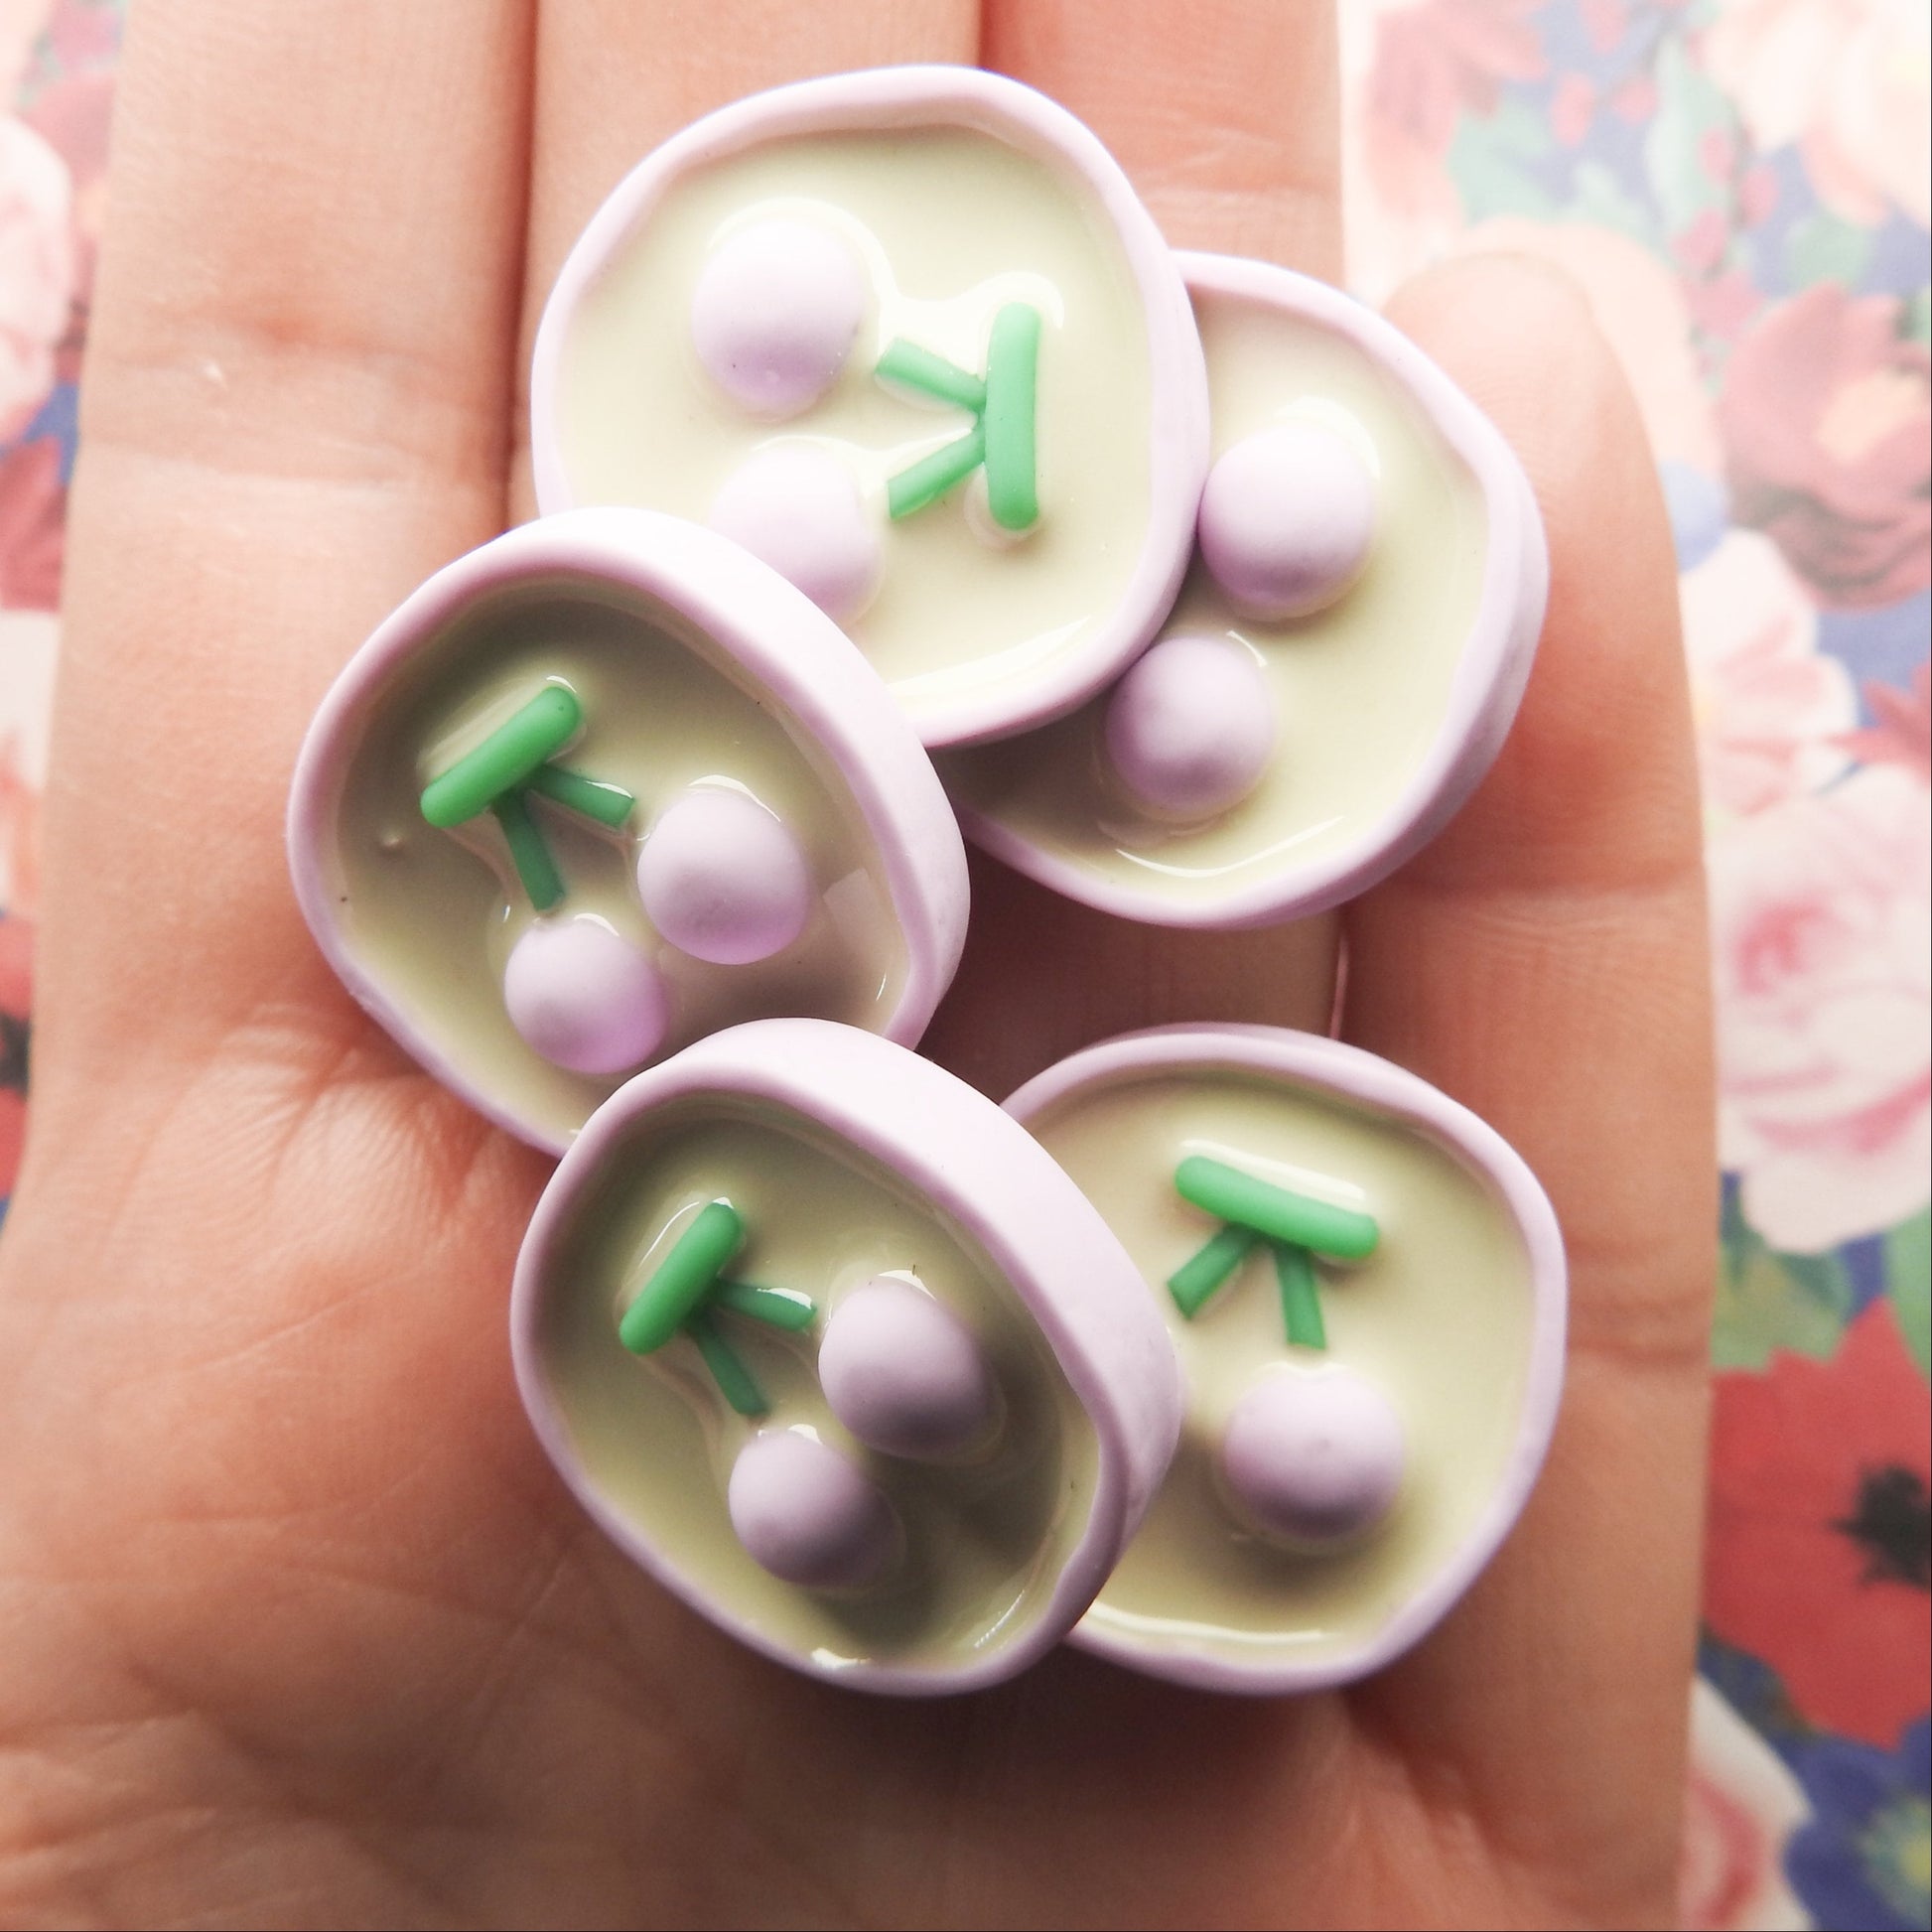 Cherry Decorative Buttons for sewing